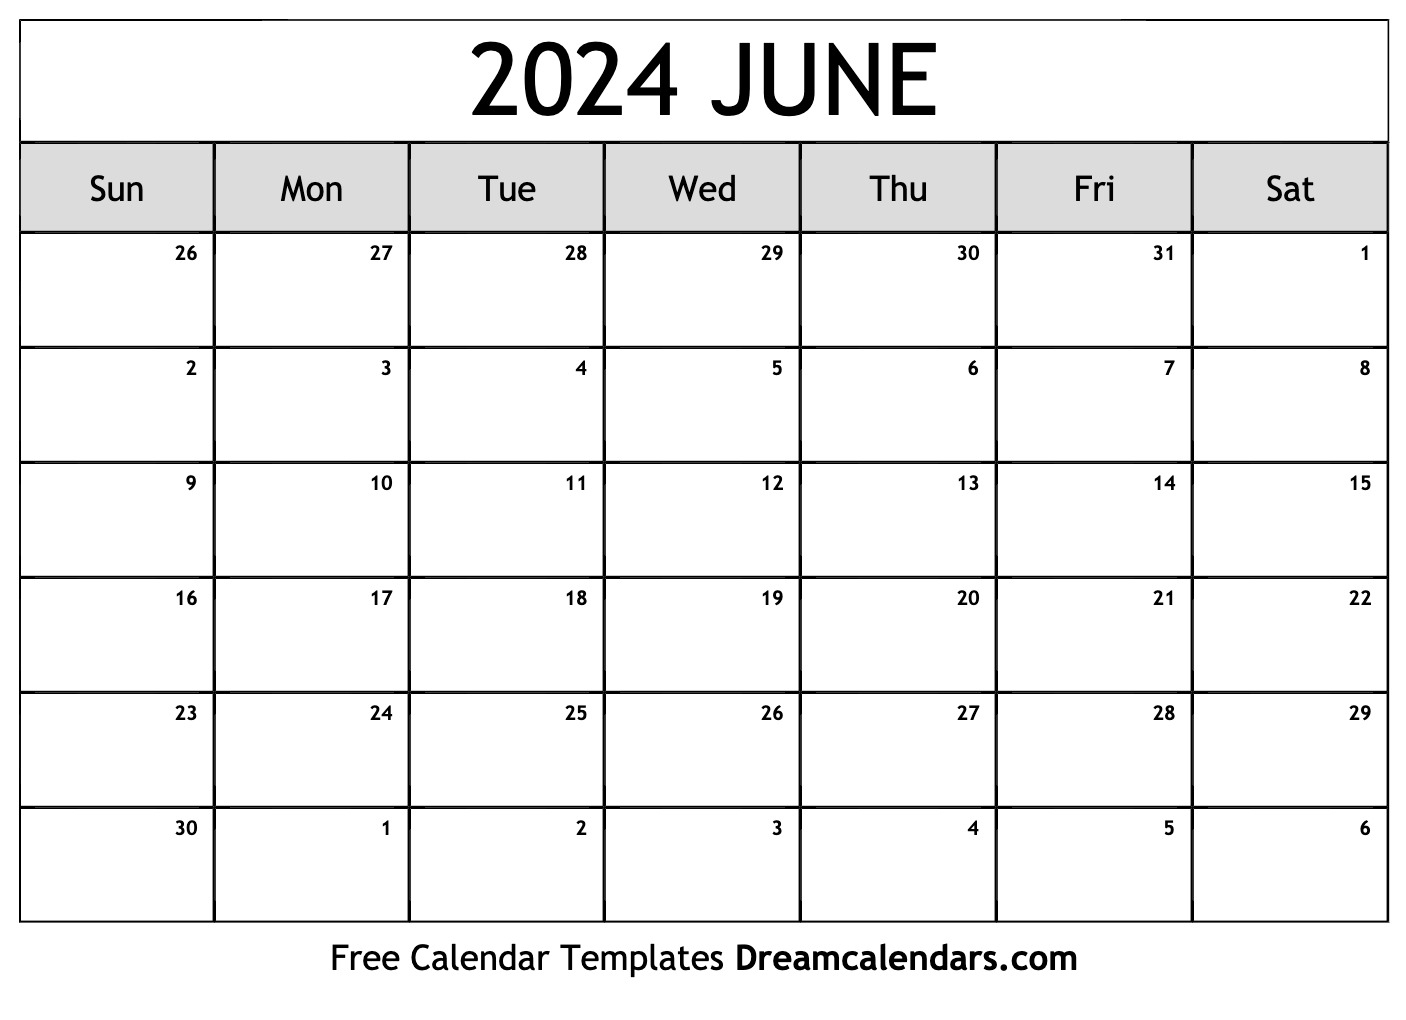 June 2024 Calendar | Free Blank Printable With Holidays for Monthly Calendar June 2024 Printable